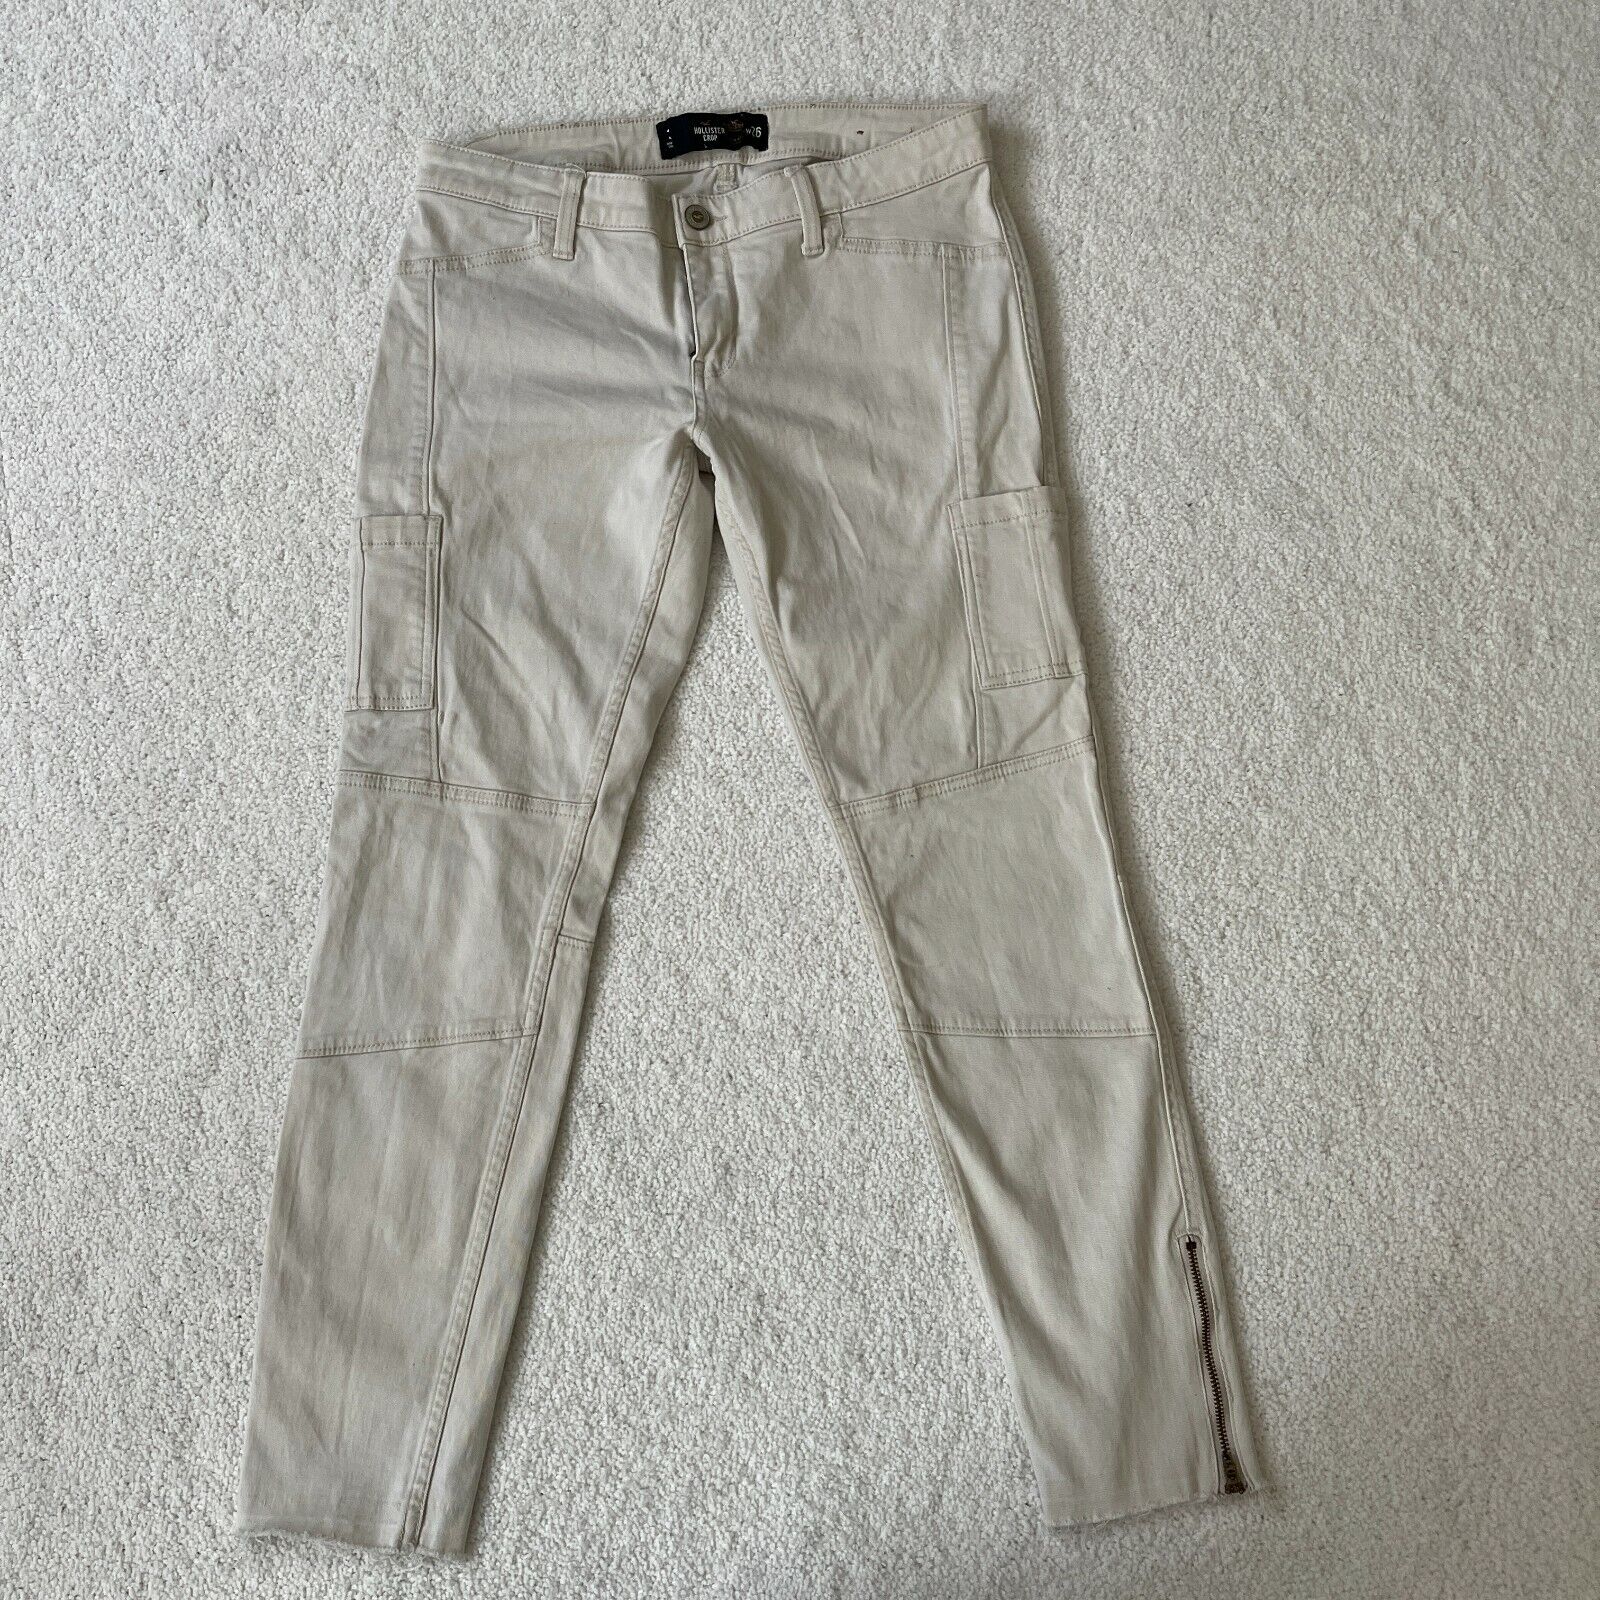 Hollister Cargo Pants Womens Size 26 Cream Stretch Ankle Zip Crop Skinny  Casual